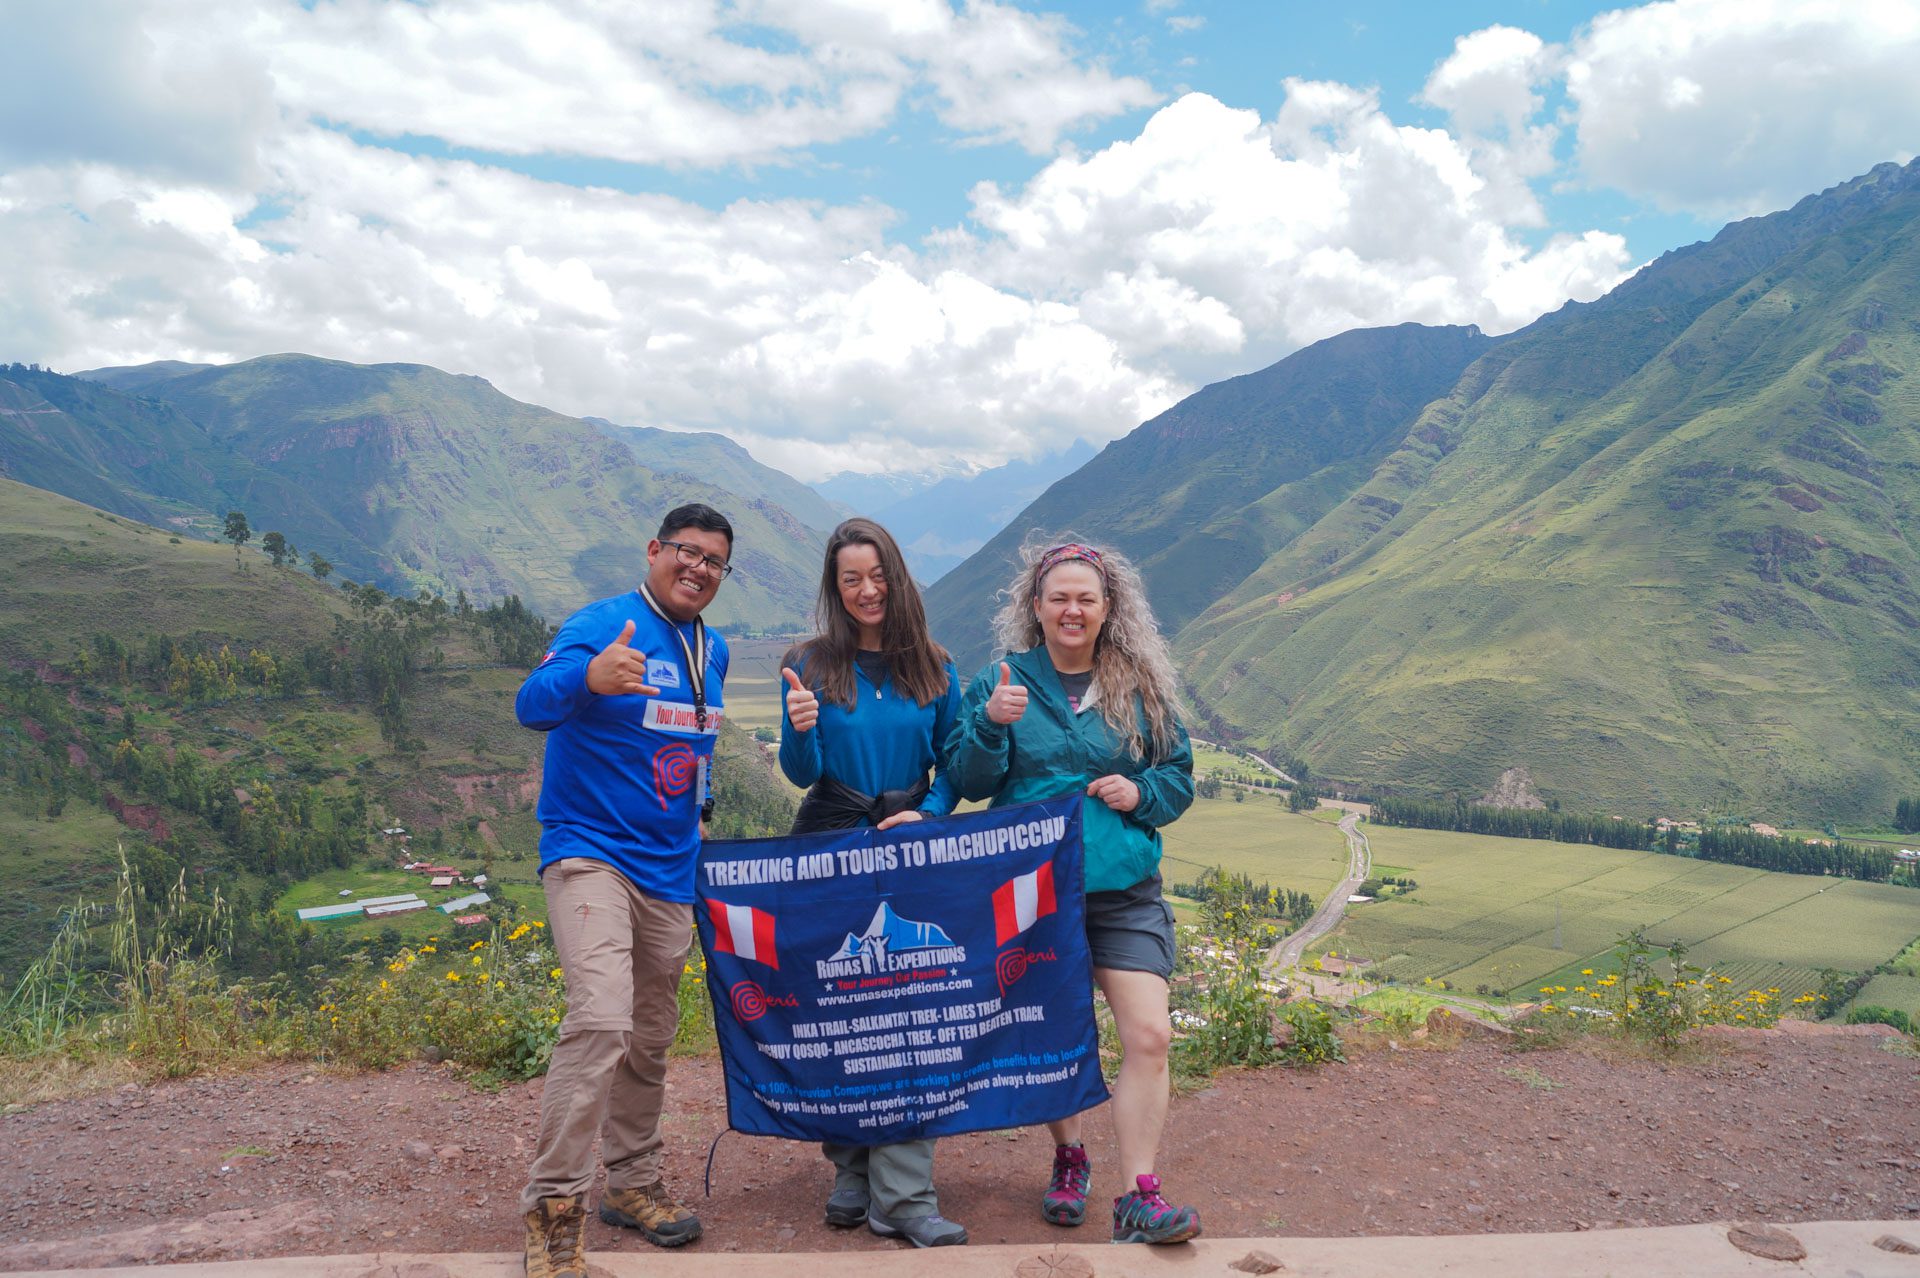 Private Full Day Super Sacred Valley with Pisac Ruins, The Salt Mines & Moray ... A single private tour covers all your Sacred Valley must-sees with this ...